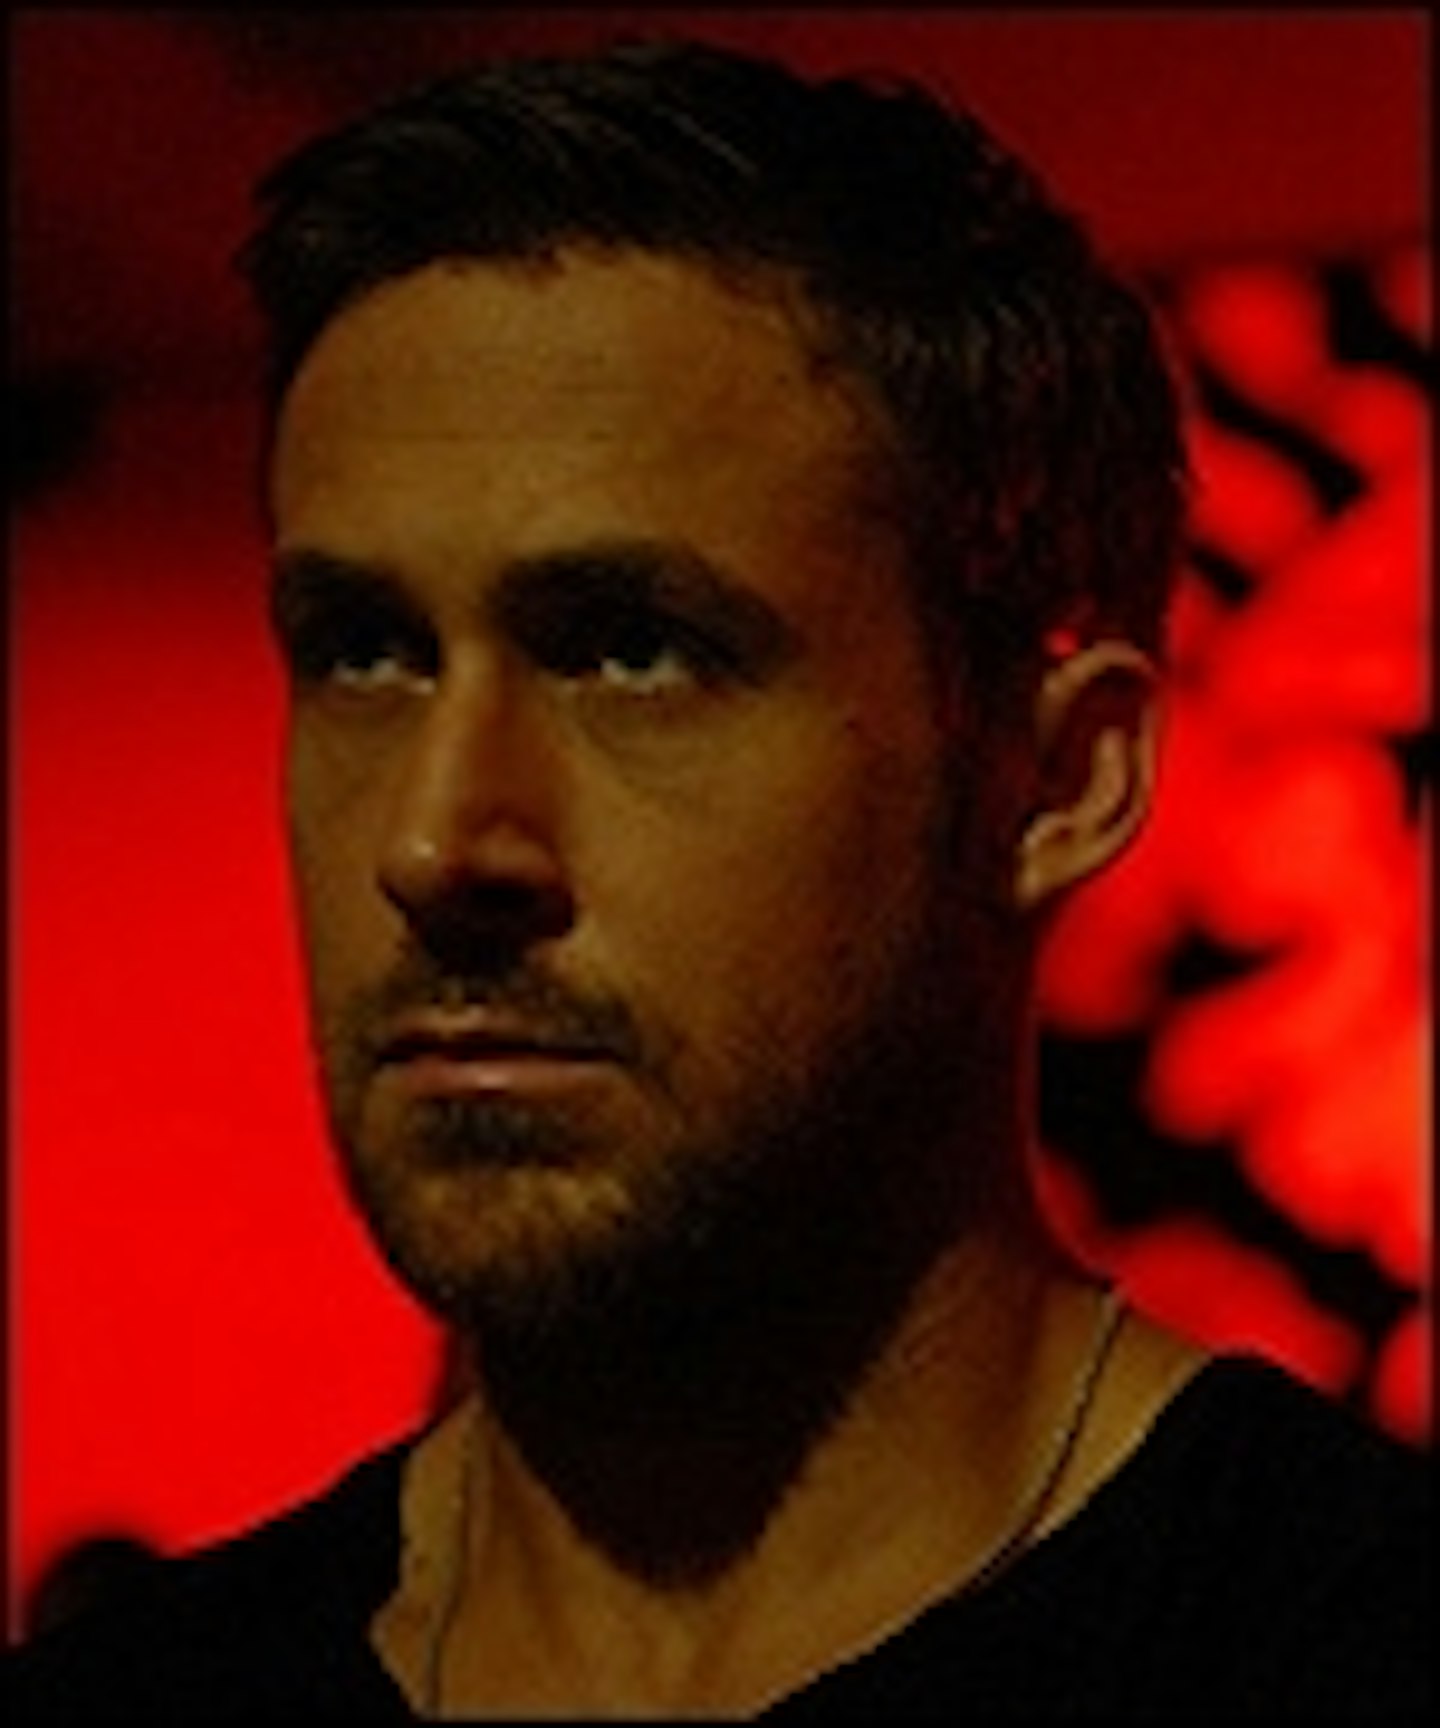 Two New Only God Forgives Trailers